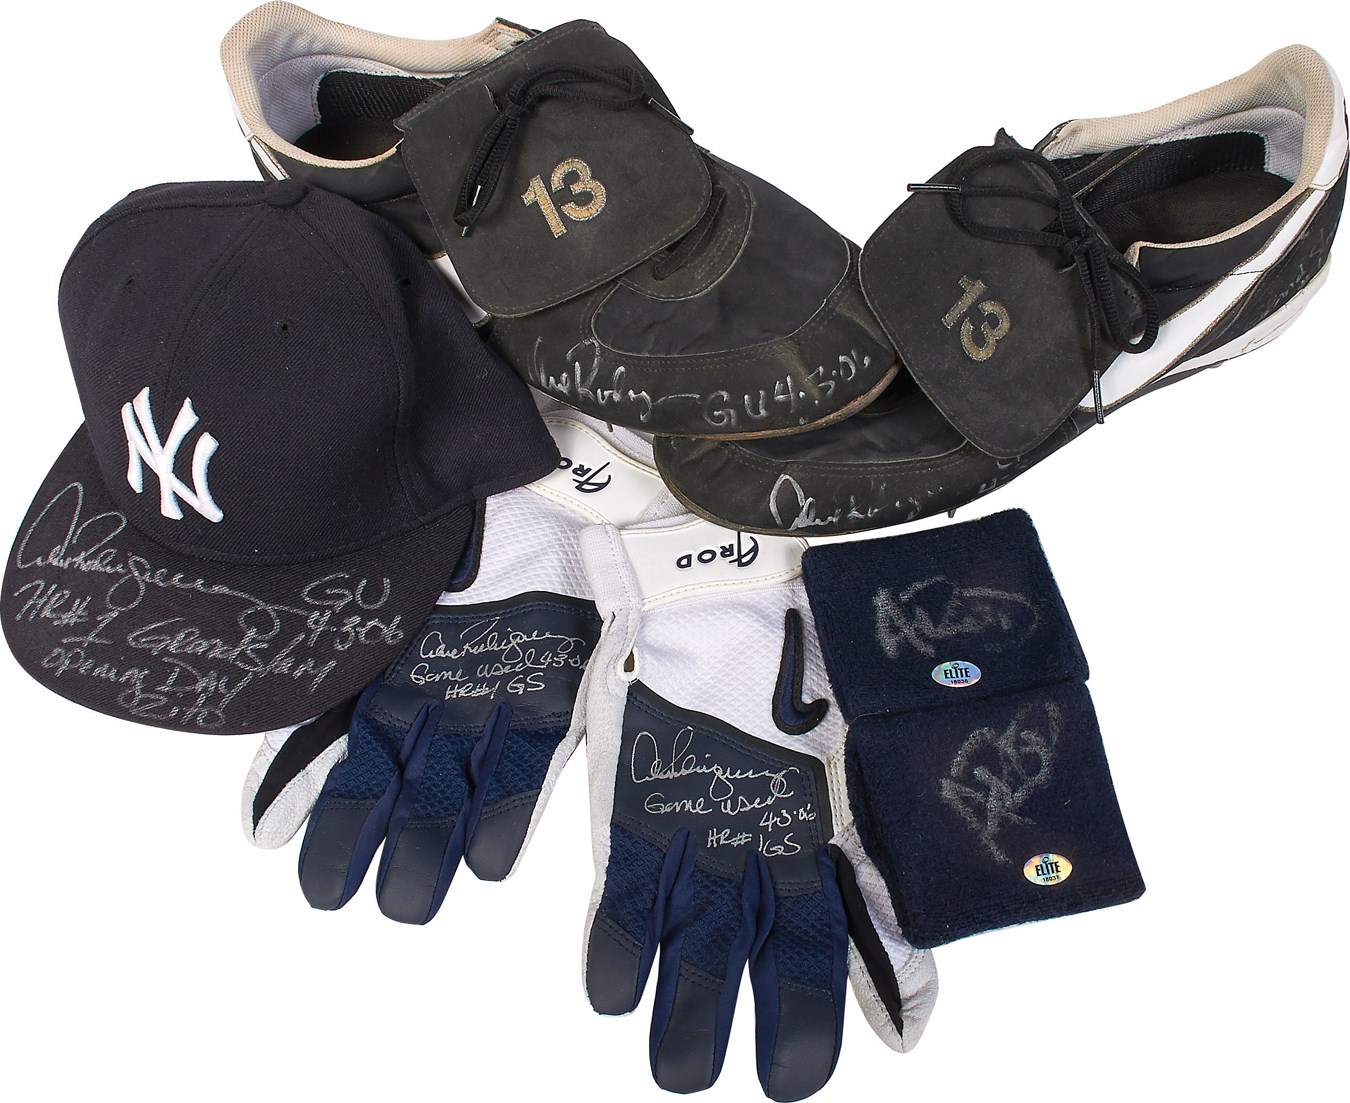 - 2006 Alex Rodriguez Game Used Opening Day "Grand Slam" Cap, Cleats & Gloves (Photomatched & A-Rod LOA)